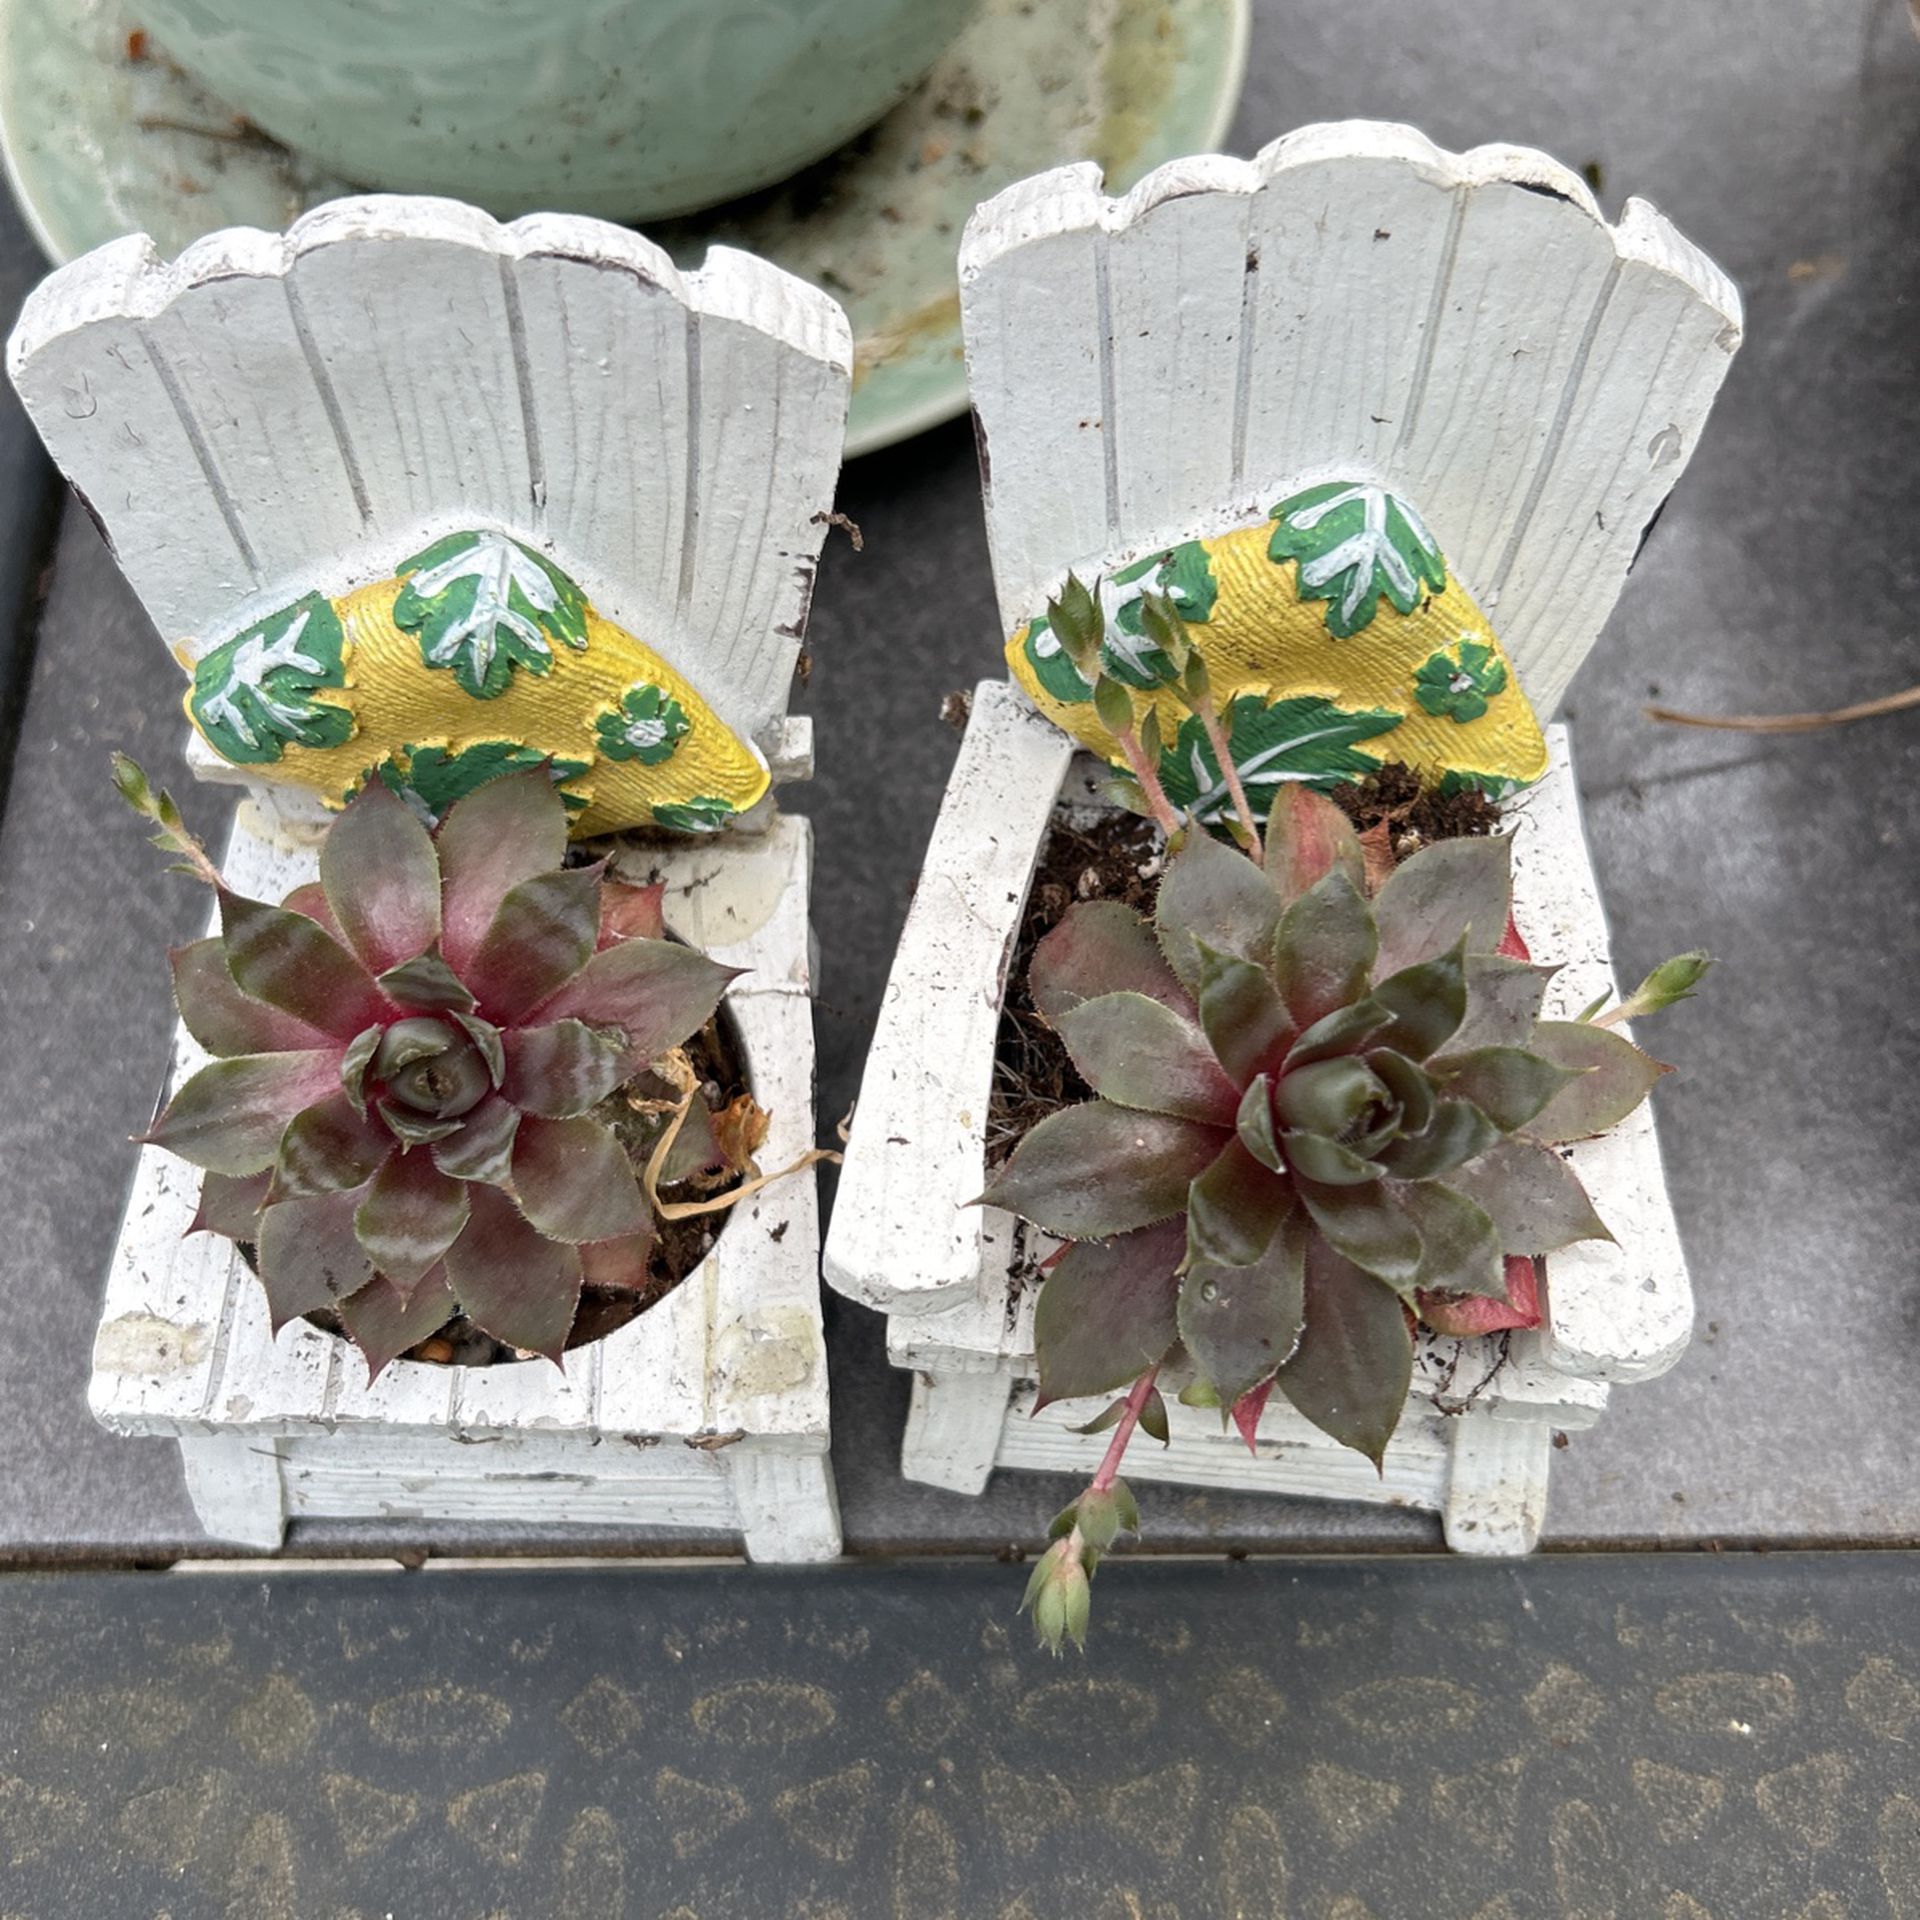 Succulent On Mini Chairs